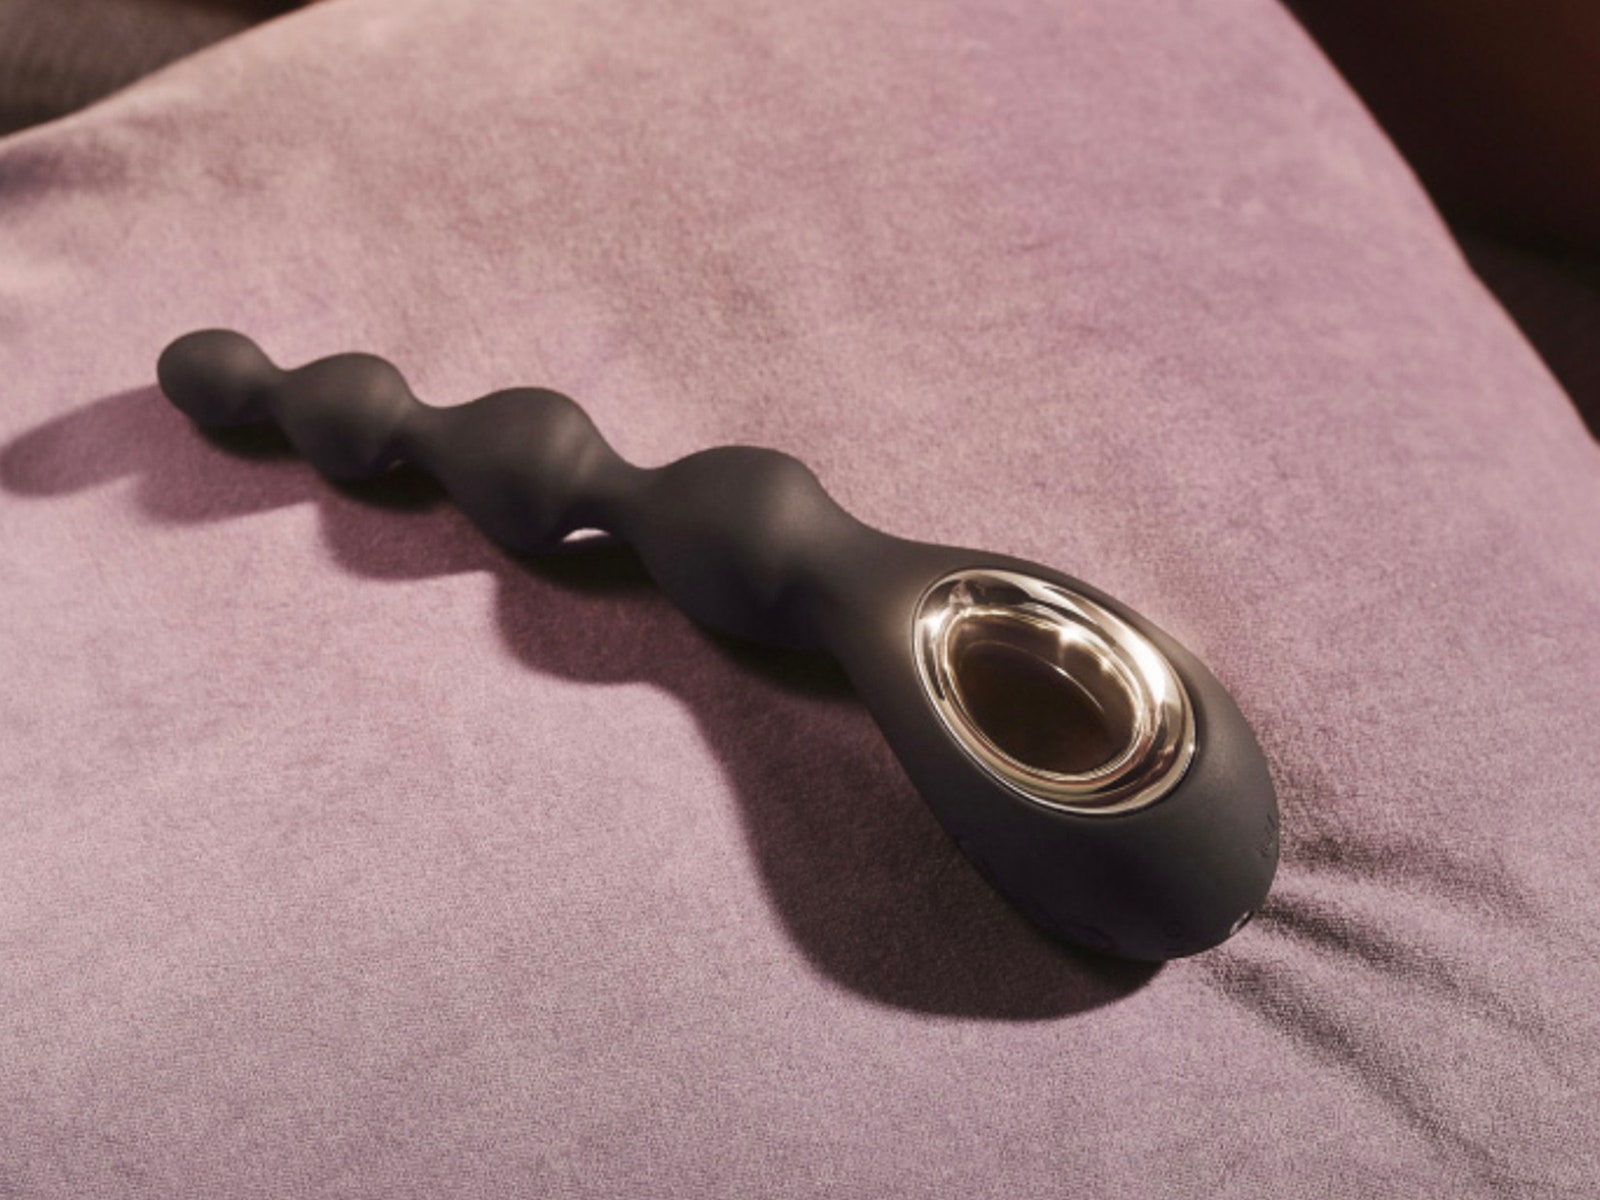 These anal sex toys are beginner-friendly and designed to maximise your pleasure